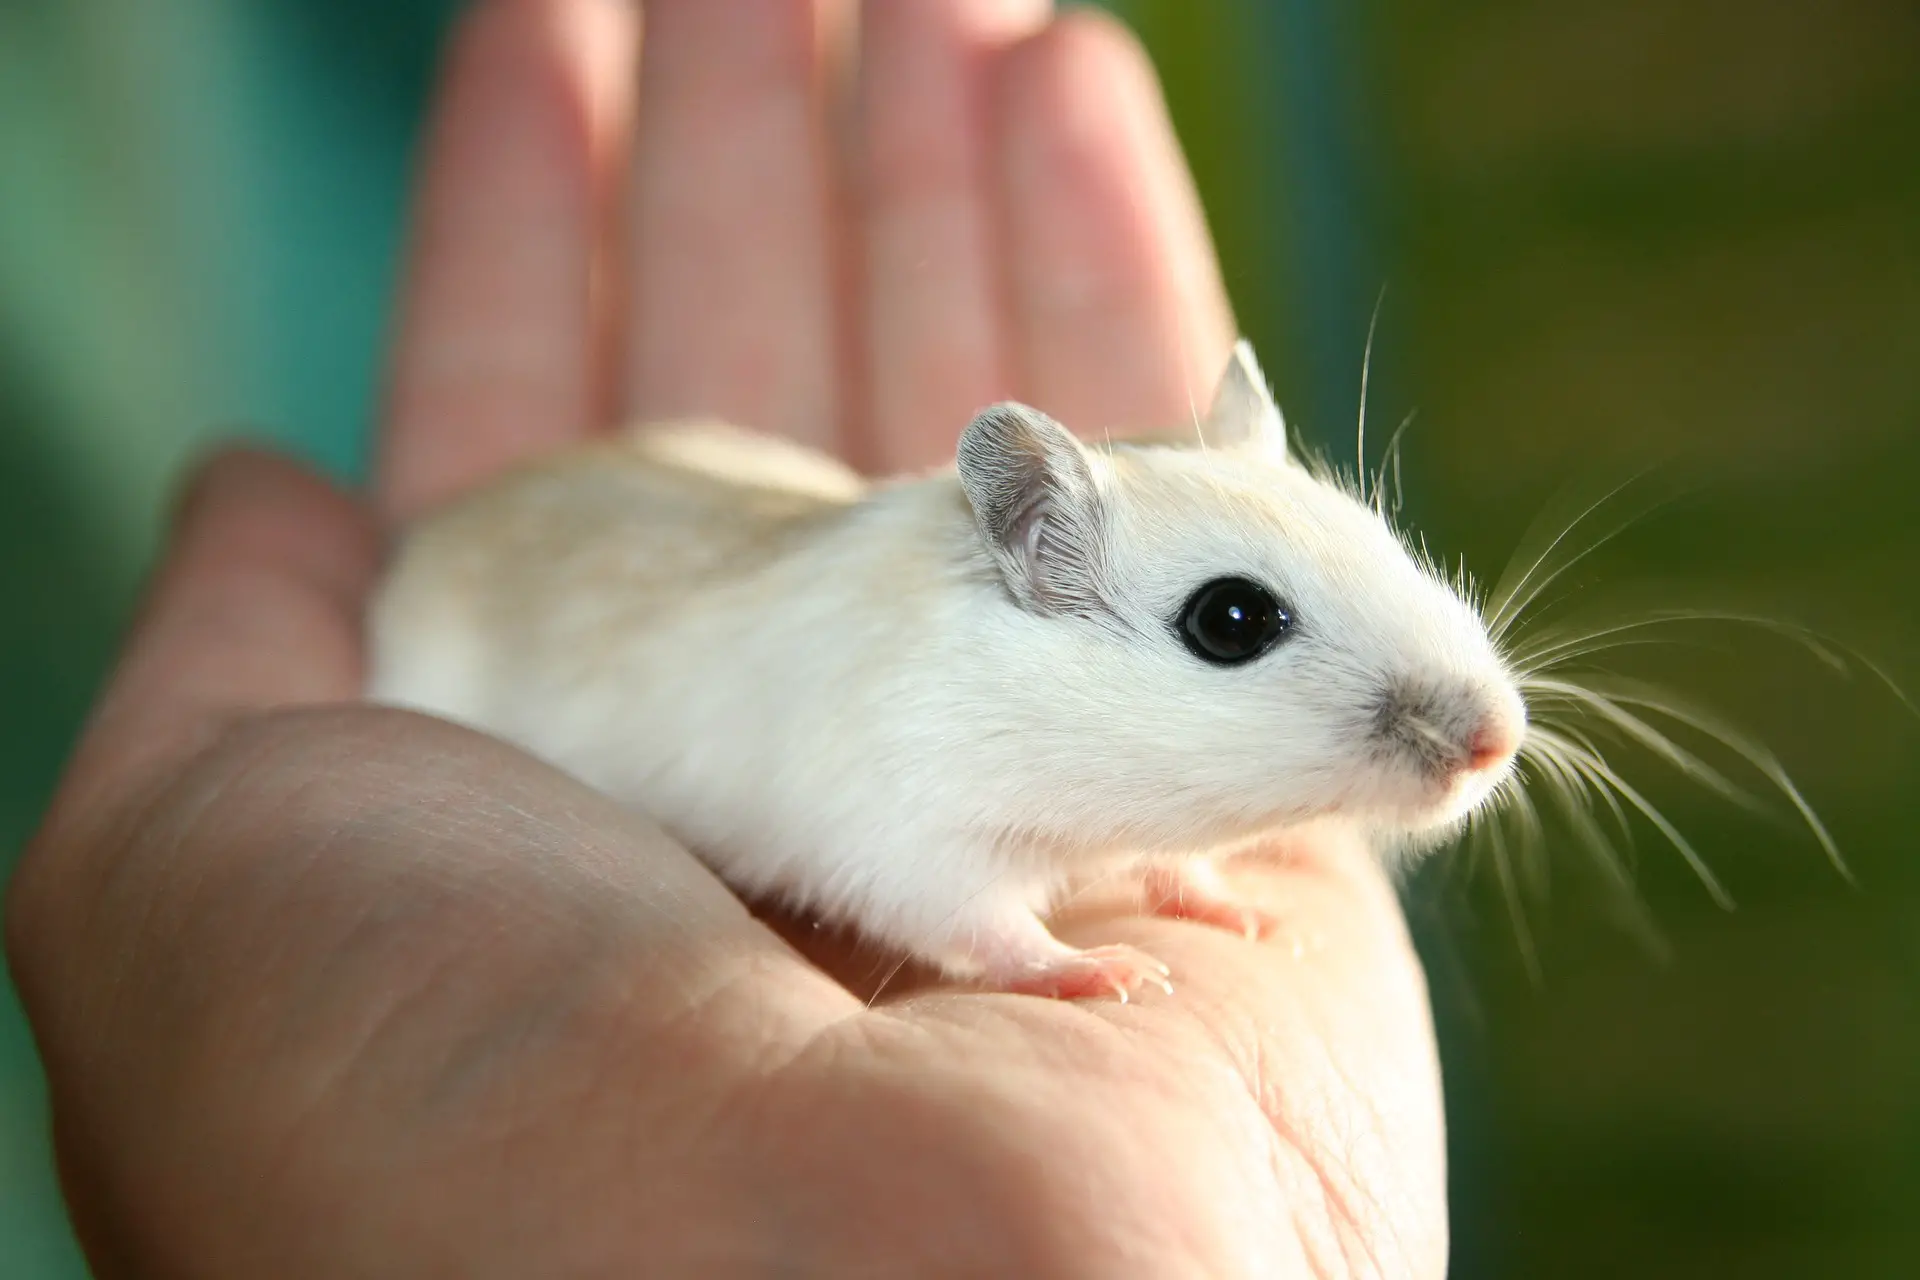 Gerbils can be neutered, but it is a risky procedure